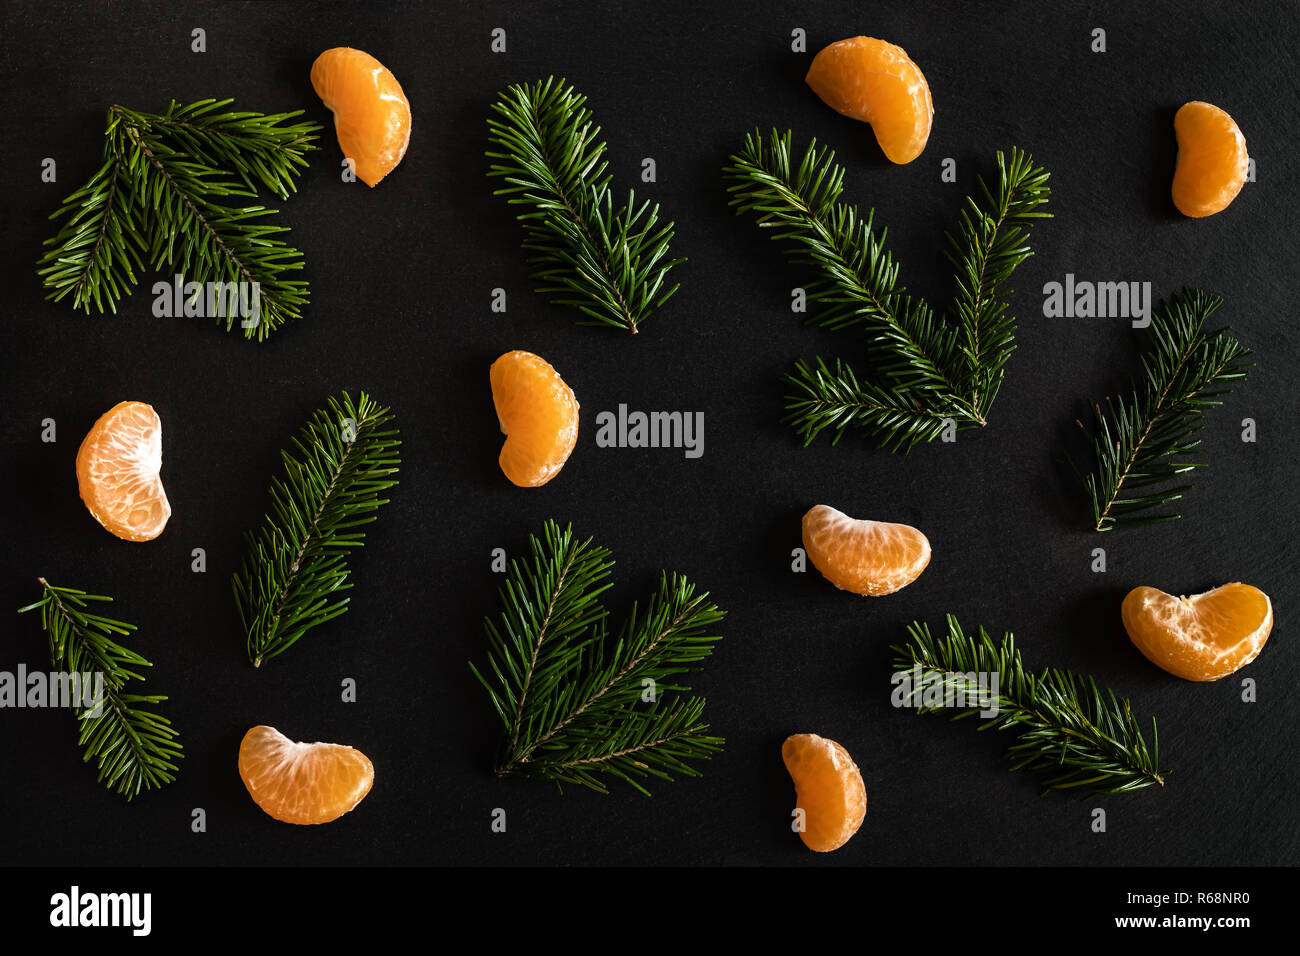 Flat lay pattern of orange mandarin slices and small fir branches on dark textured background. Stock Photo